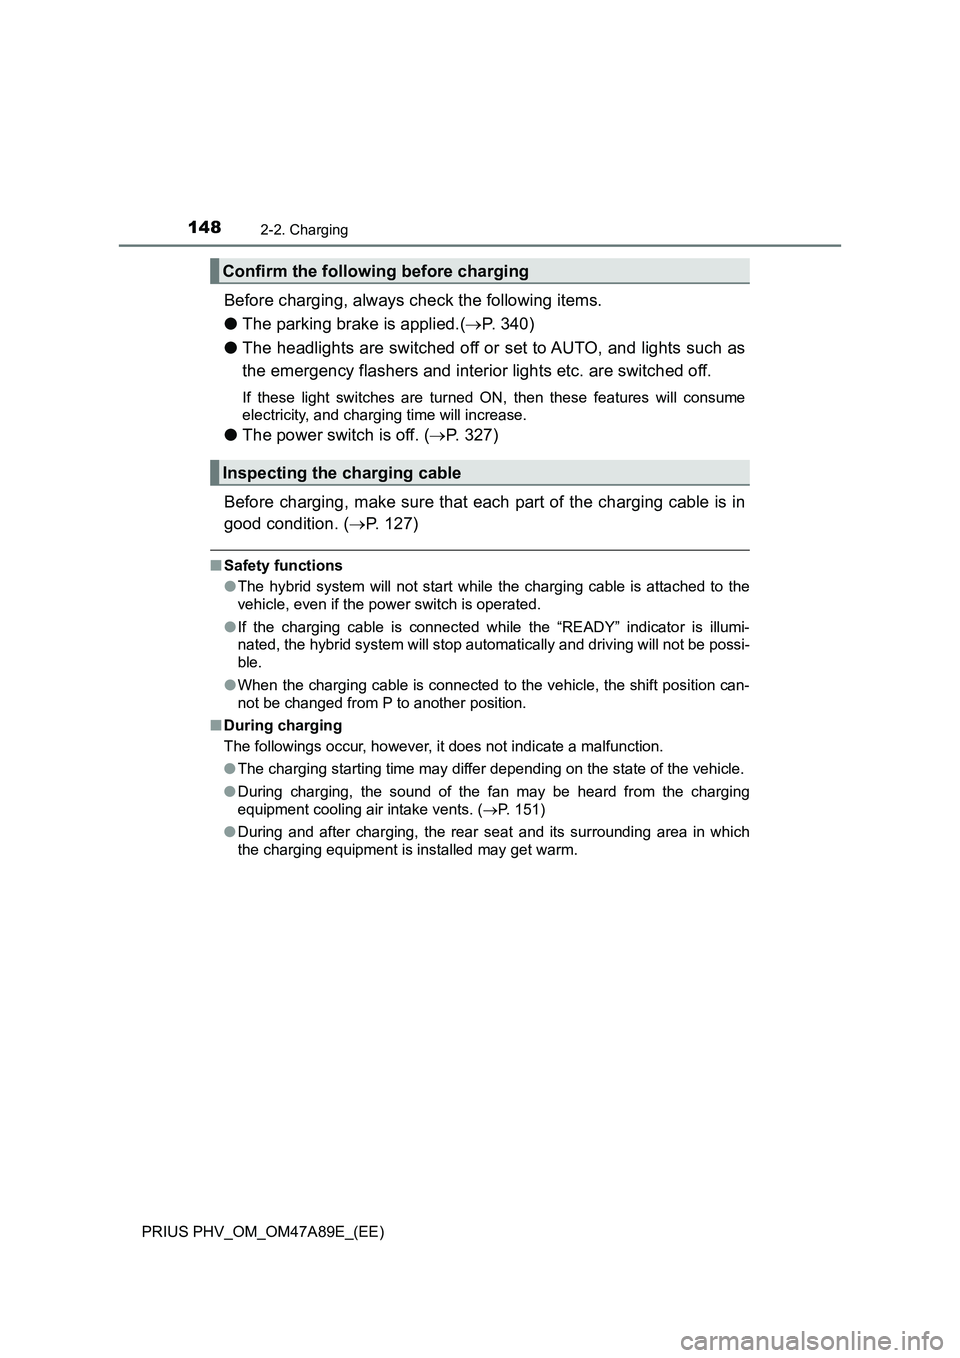 TOYOTA PRIUS PLUG-IN HYBRID 2017  Owners Manual 1482-2. Charging
PRIUS PHV_OM_OM47A89E_(EE)
Before charging, always check the following items.
●The parking brake is applied.(P. 340)
●The headlights are switched off or set to AUTO, and lights